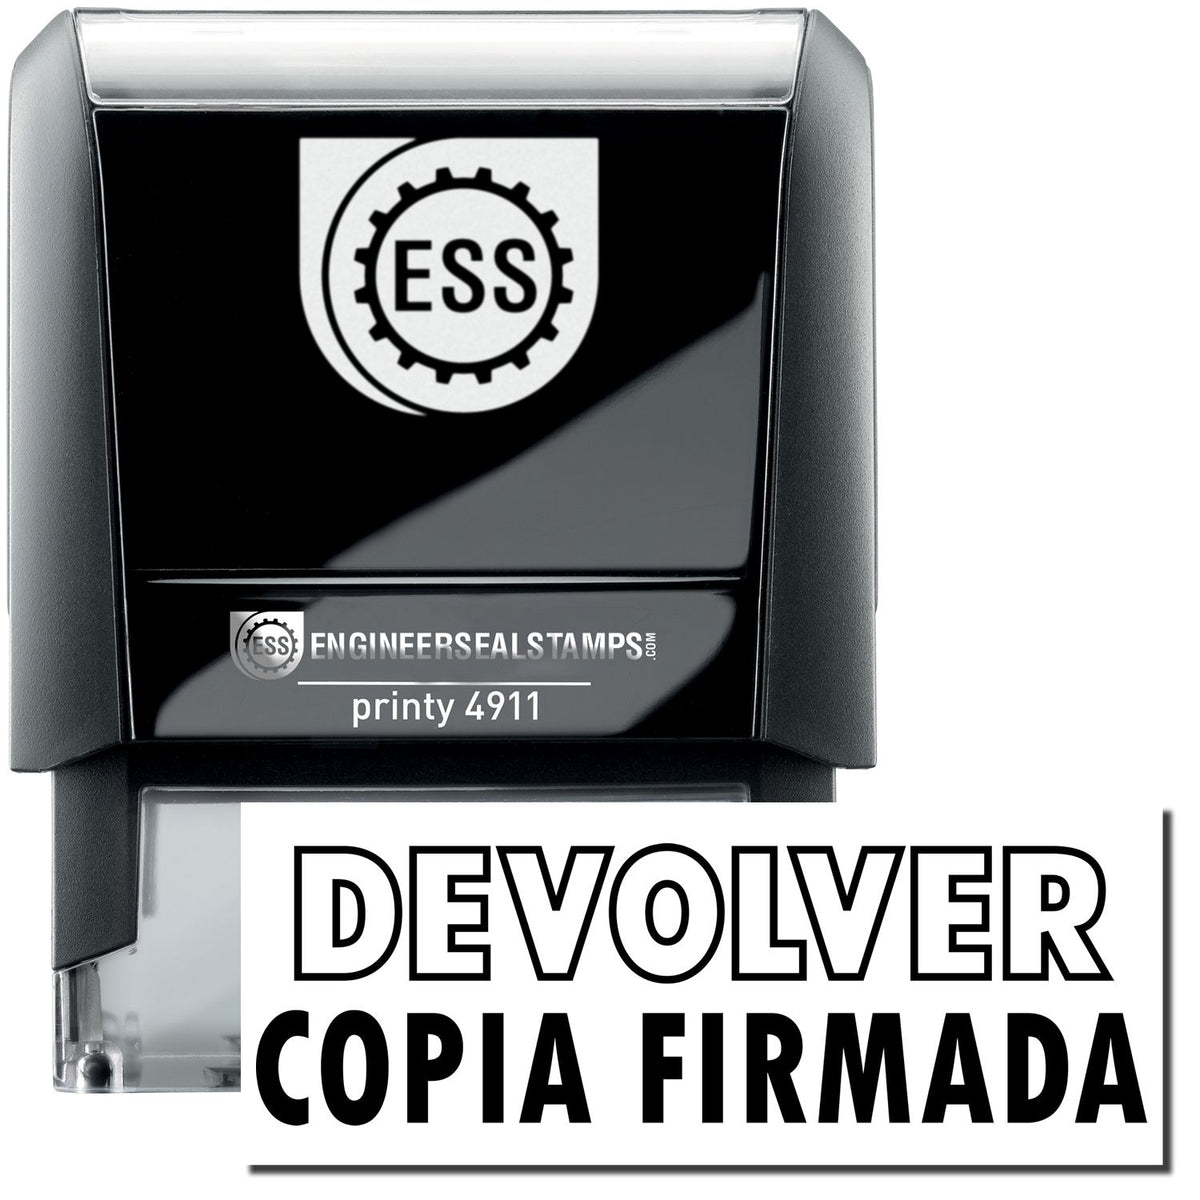 A self-inking stamp with a stamped image showing how the text &quot;DEVOLVER COPIA FIRMADA&quot; (&quot;DEVOLVER&quot; in an outline style) is displayed after stamping.